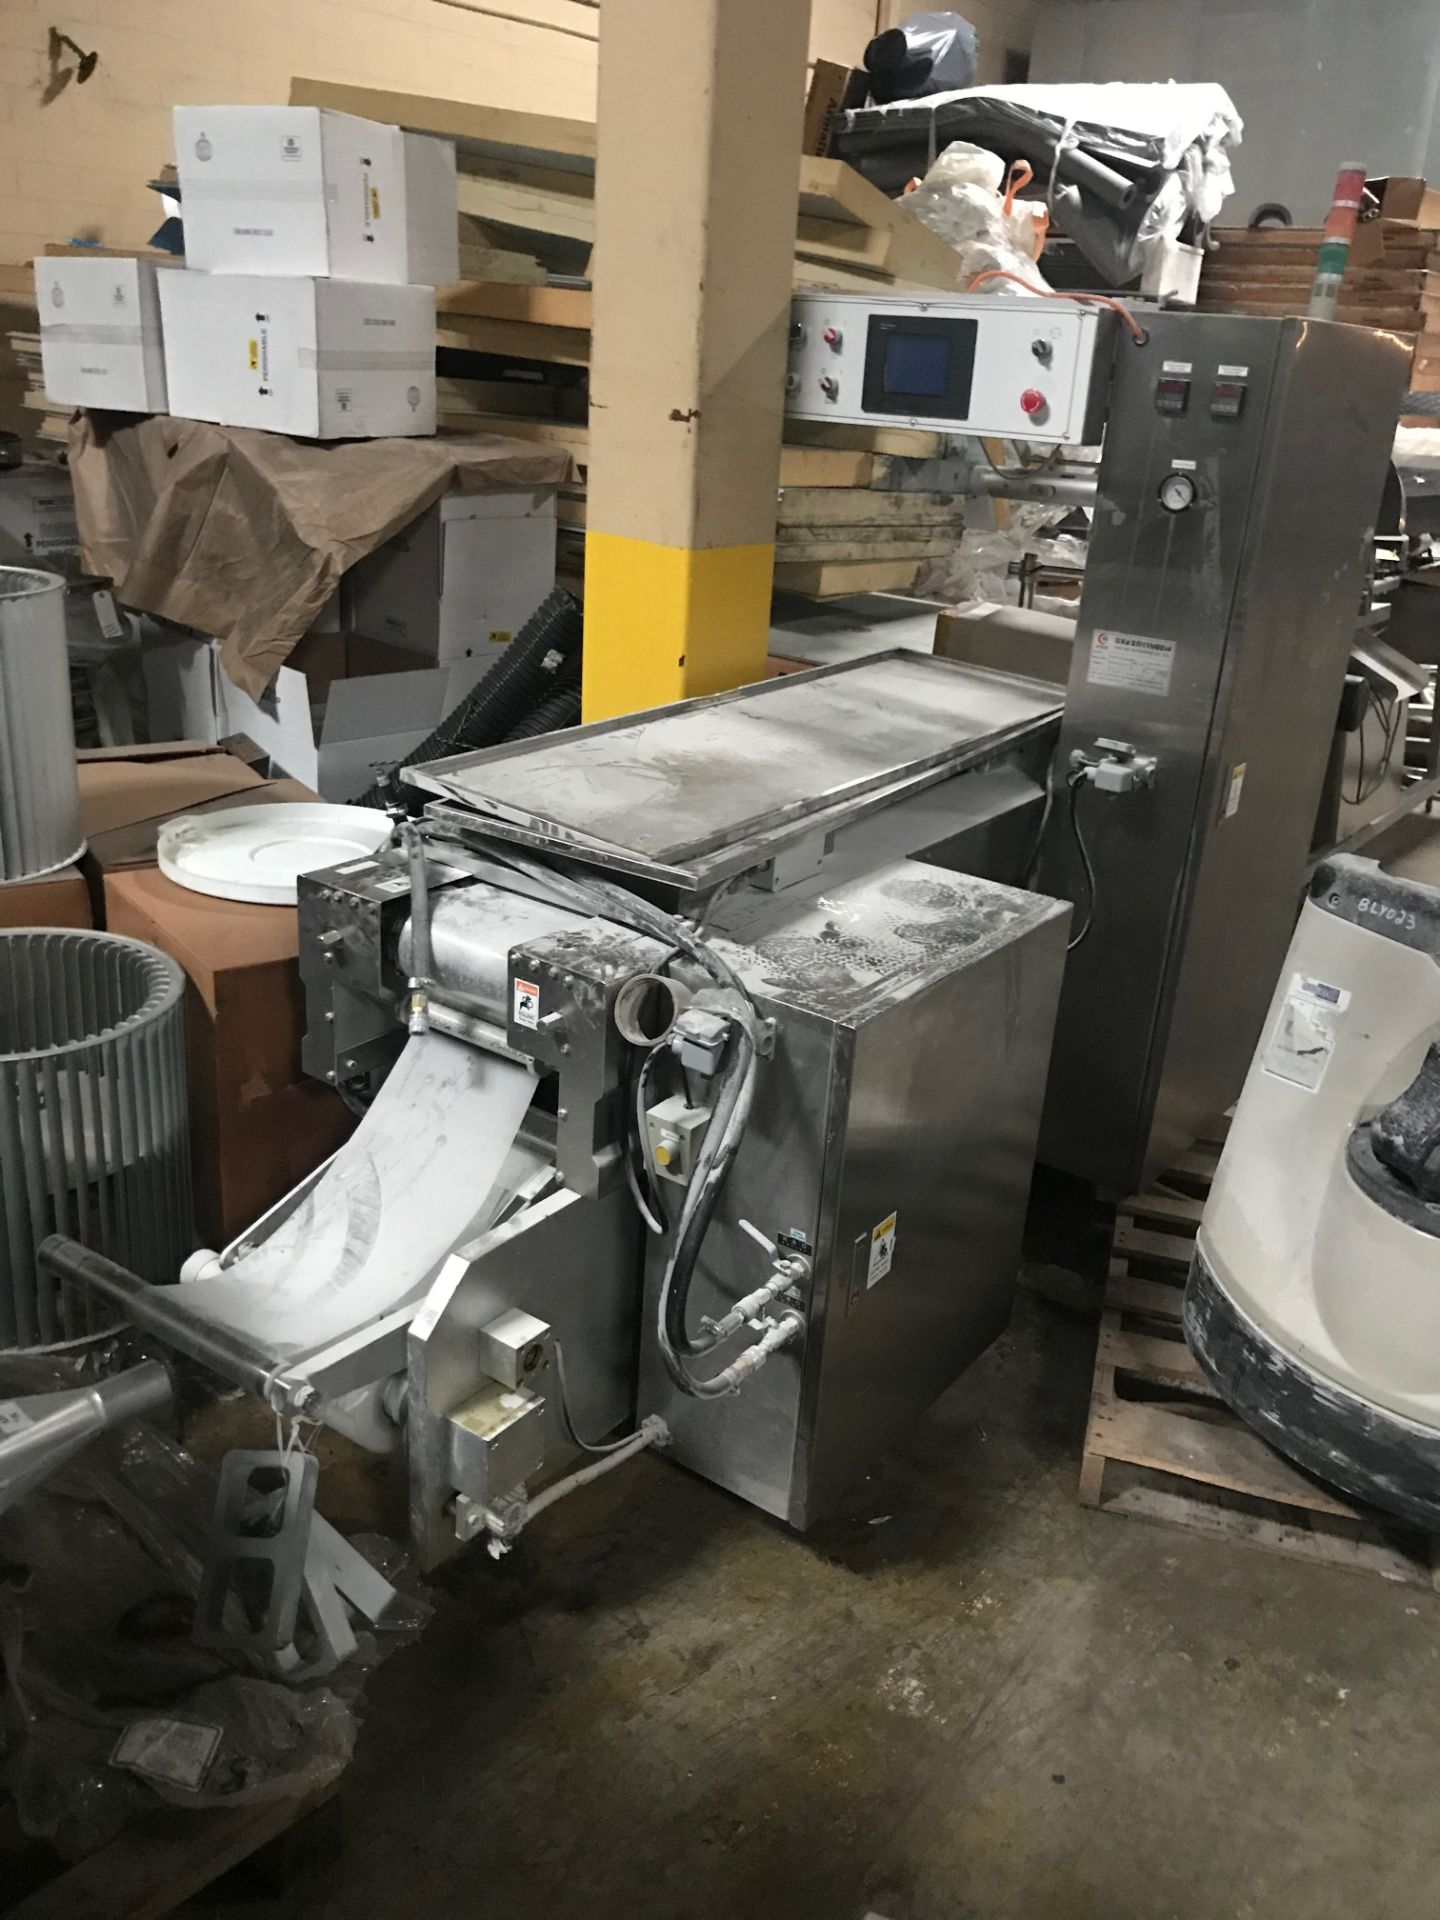 Chei Mei Automatic Packaging Machine, Serial# 14951, 220 Volts, 60 Hz - Image 2 of 6